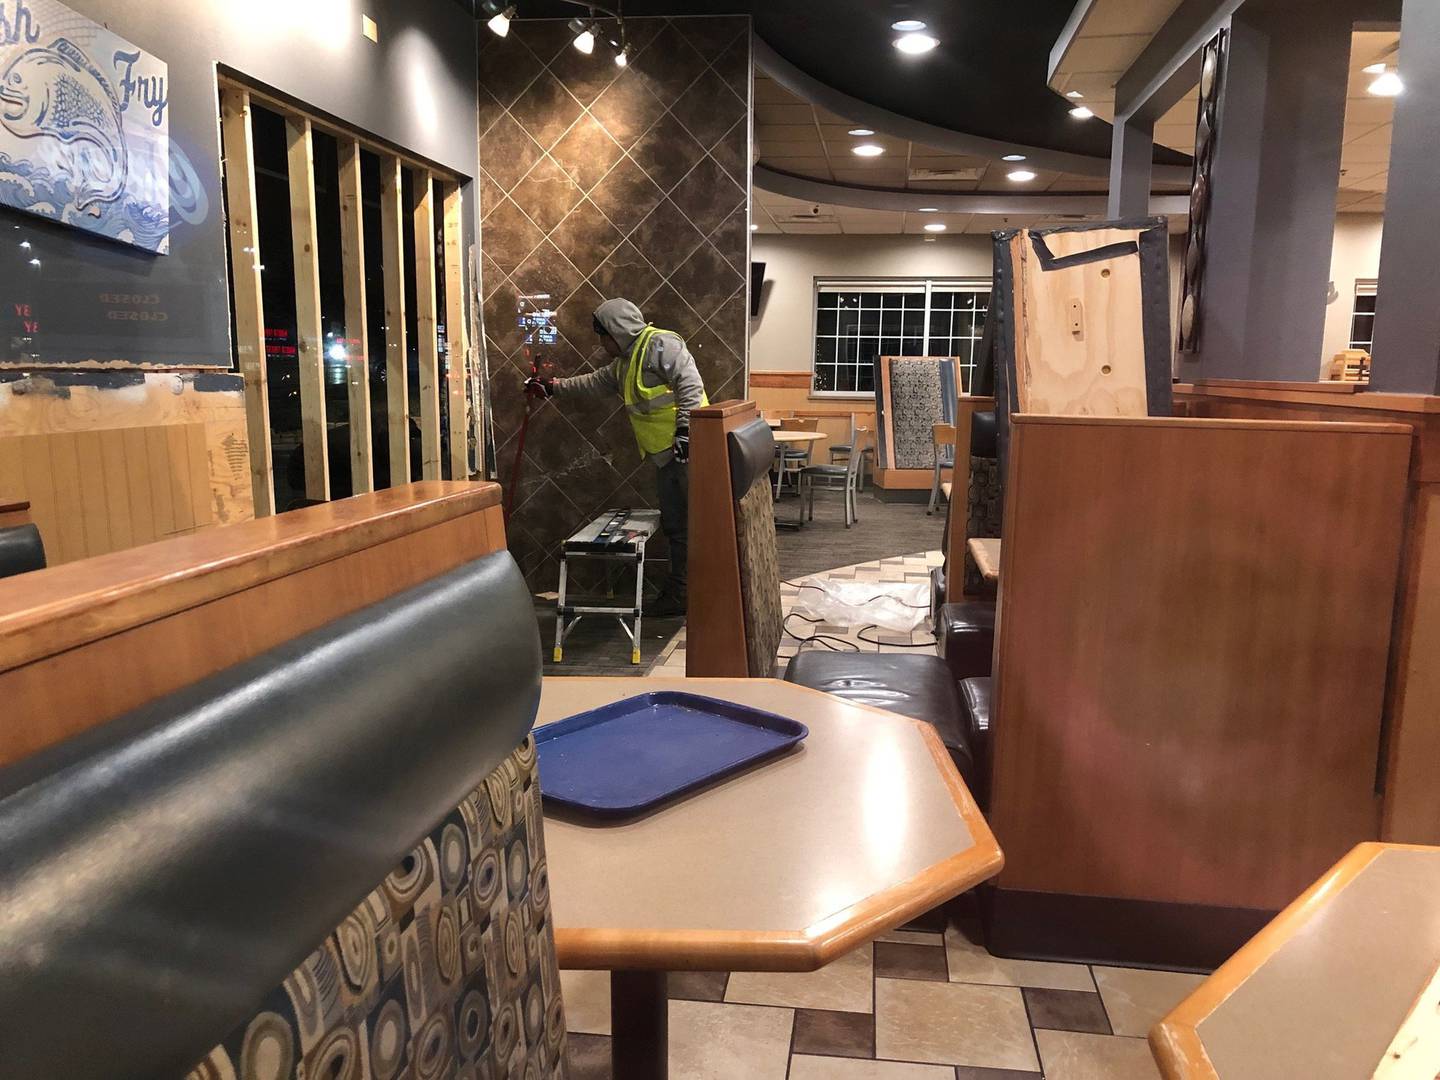 A Culver's restaurant in Morton Grove was hit by a car whose driver drove off Dempster Street. Four people inside the restaurant were taken to hospitals with minor injuries. The driver was not injured, police said. After the crash, workers were making repairs.